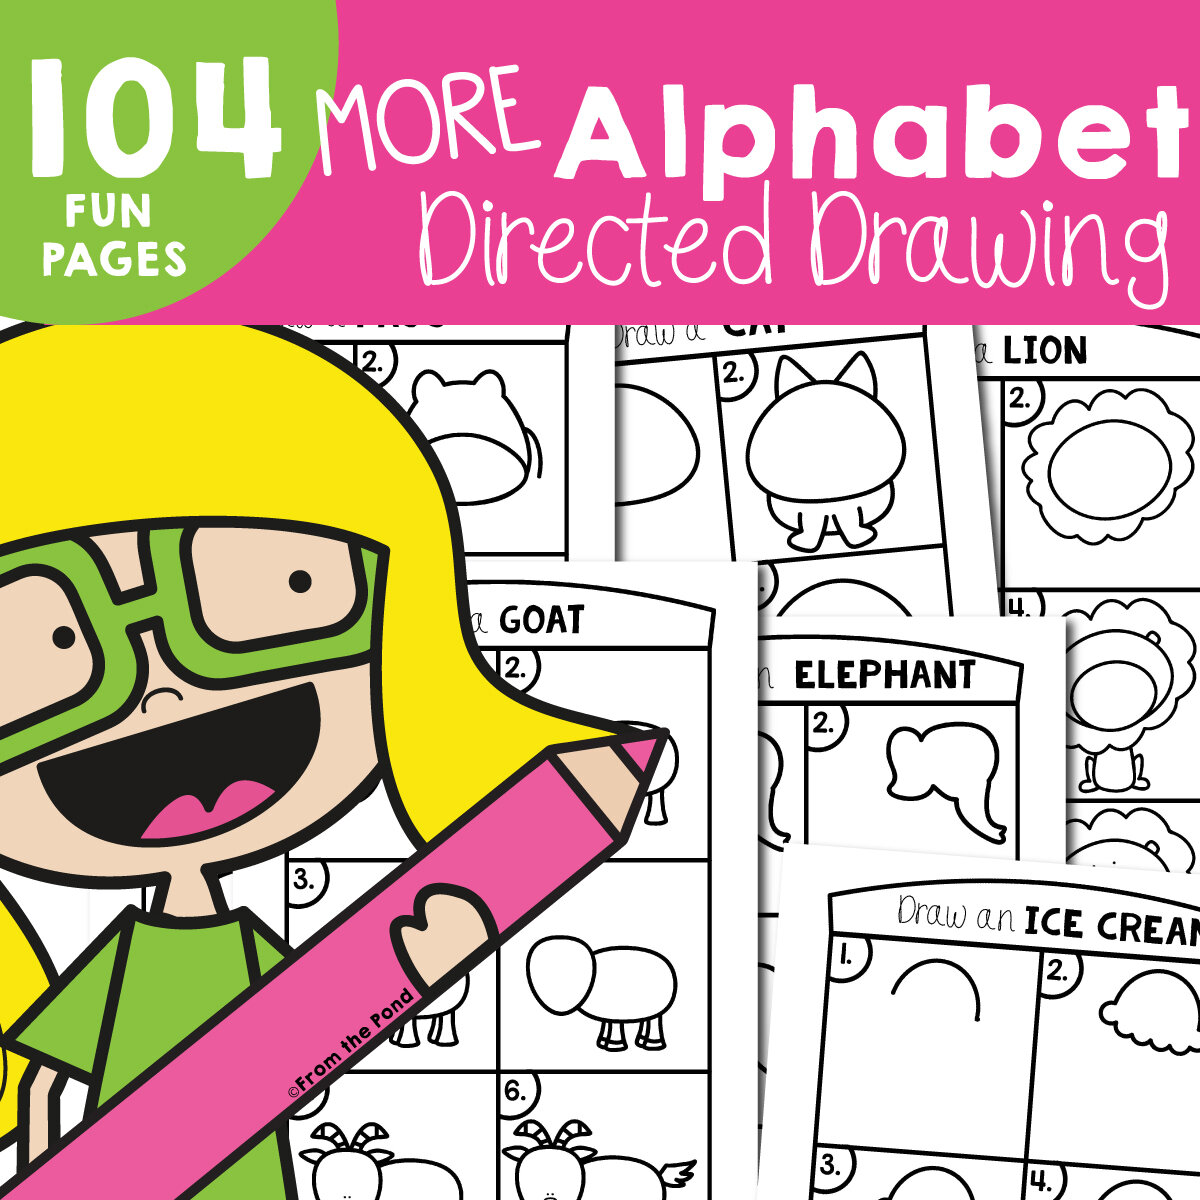 More Alphabet Directed Drawing